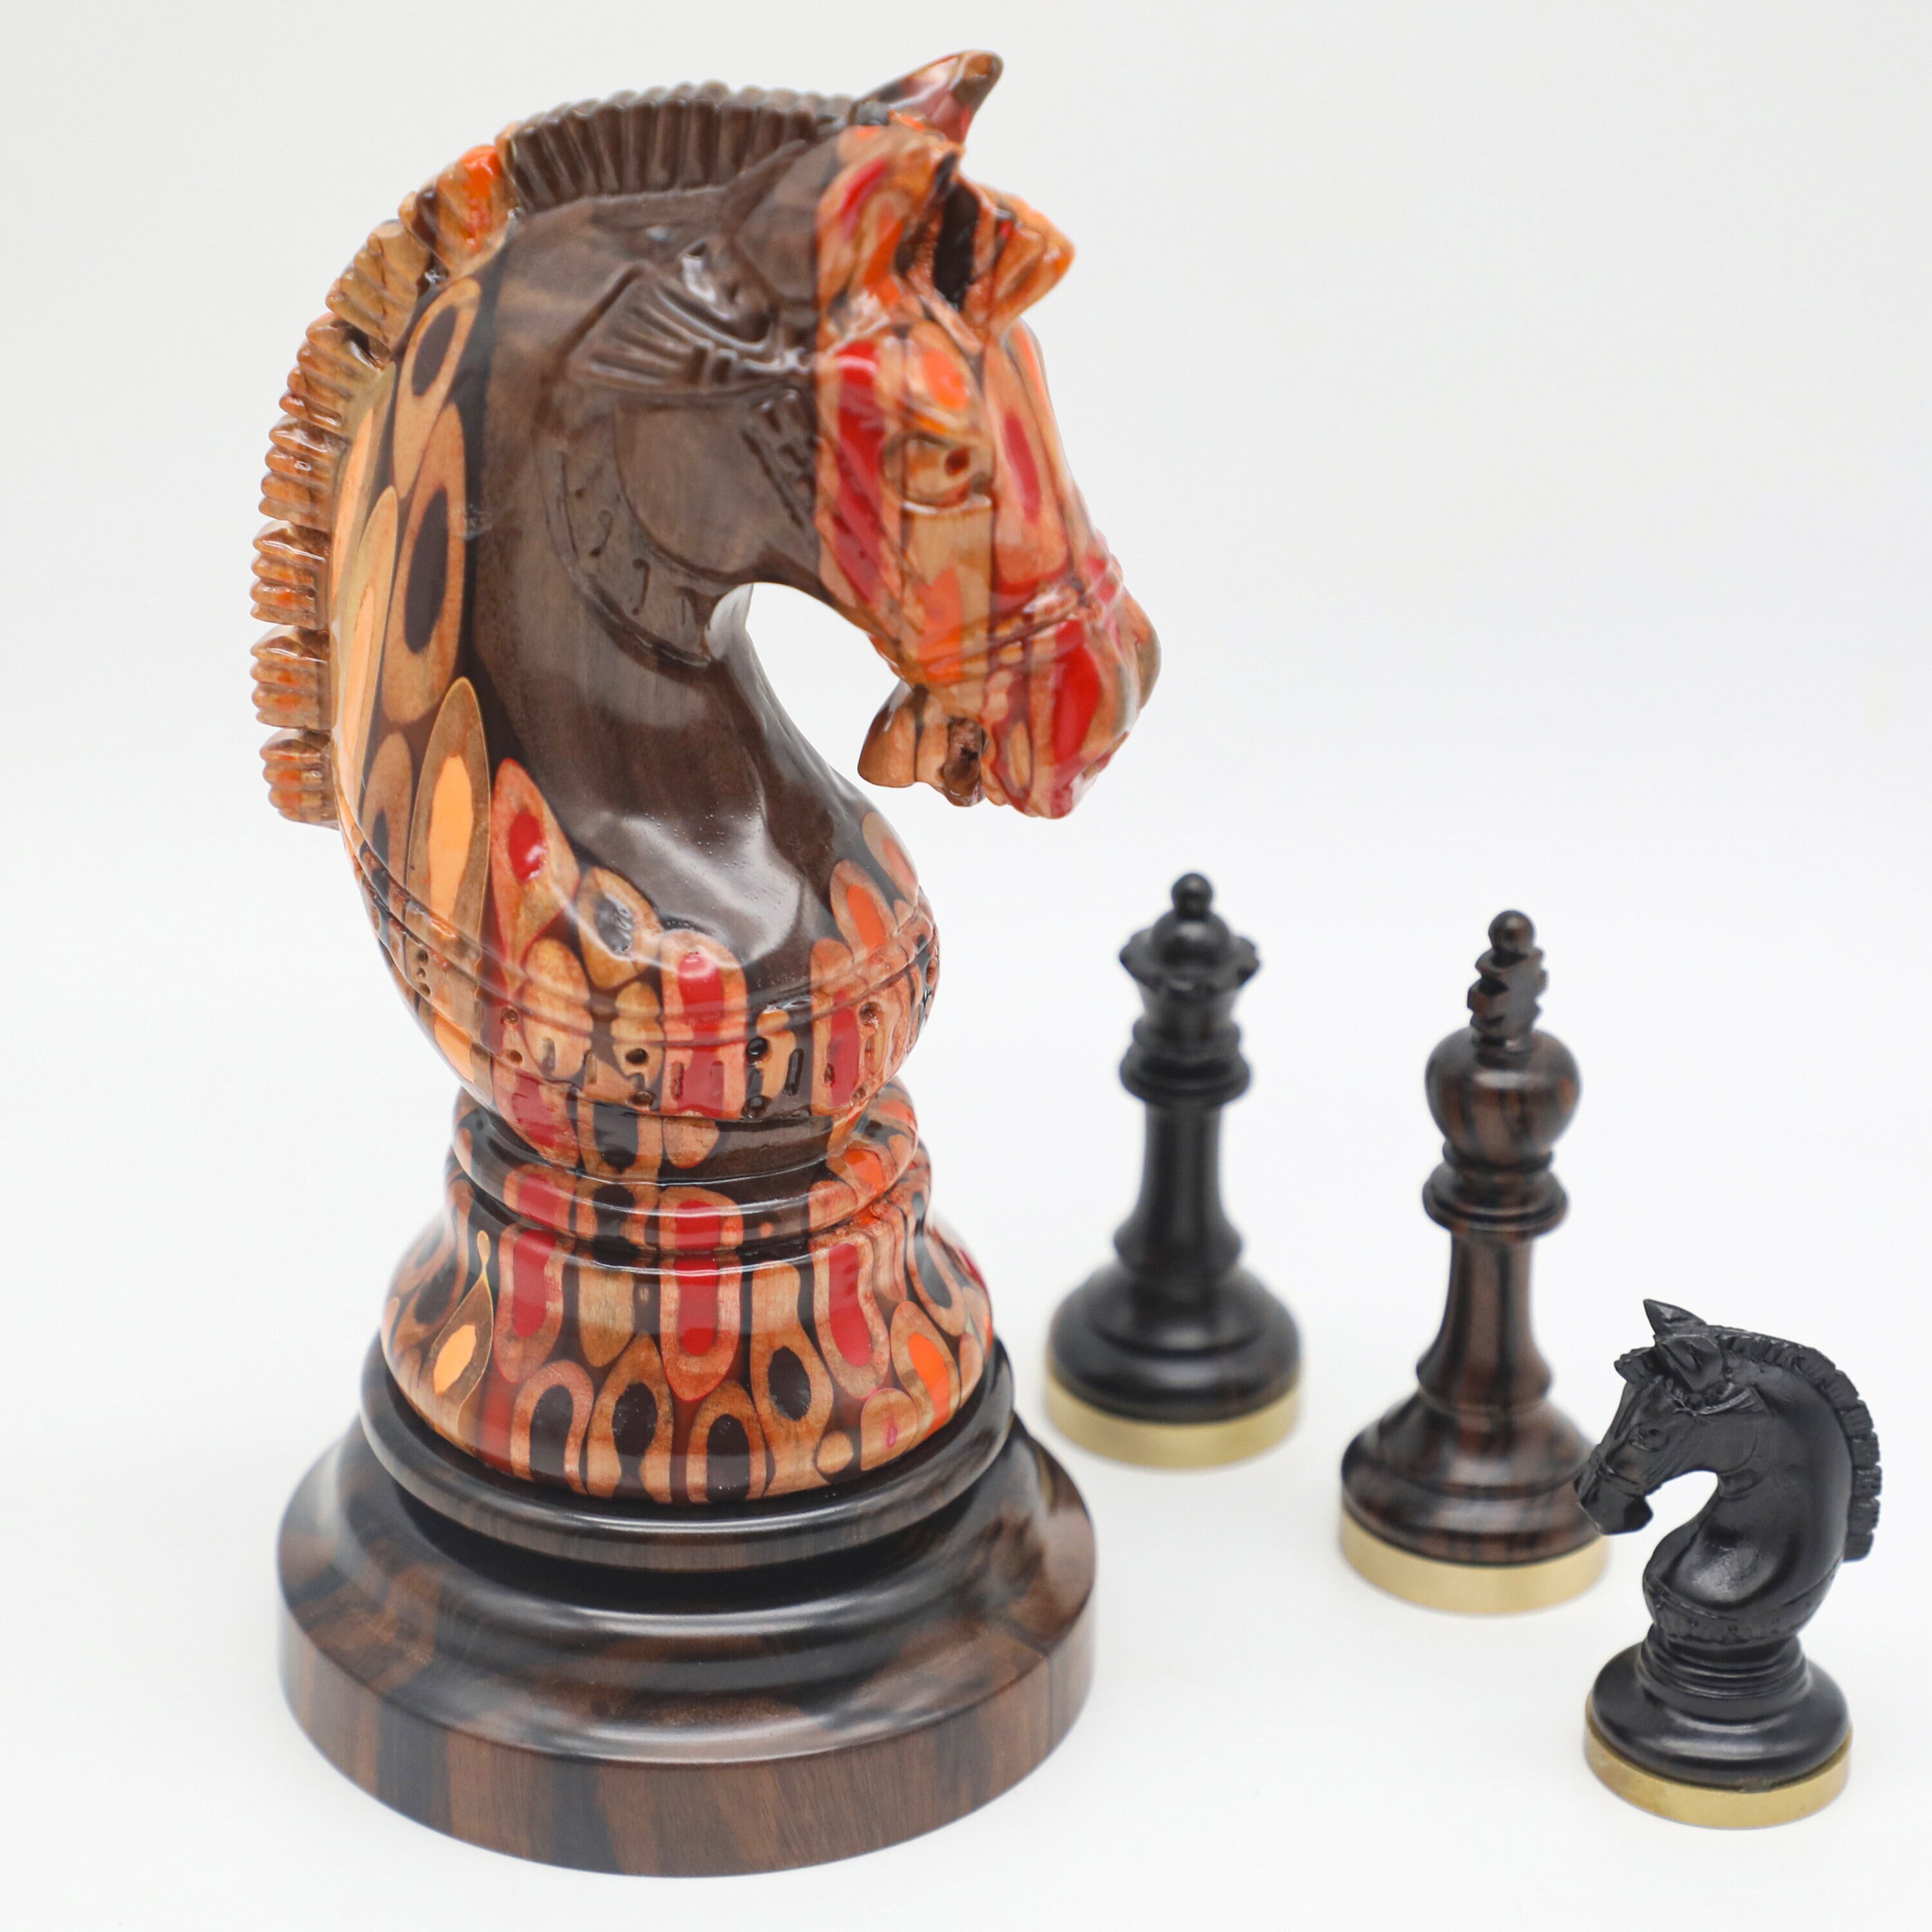 Giant Deluxe Chess Piece the Knight Blended of Wood Resin 